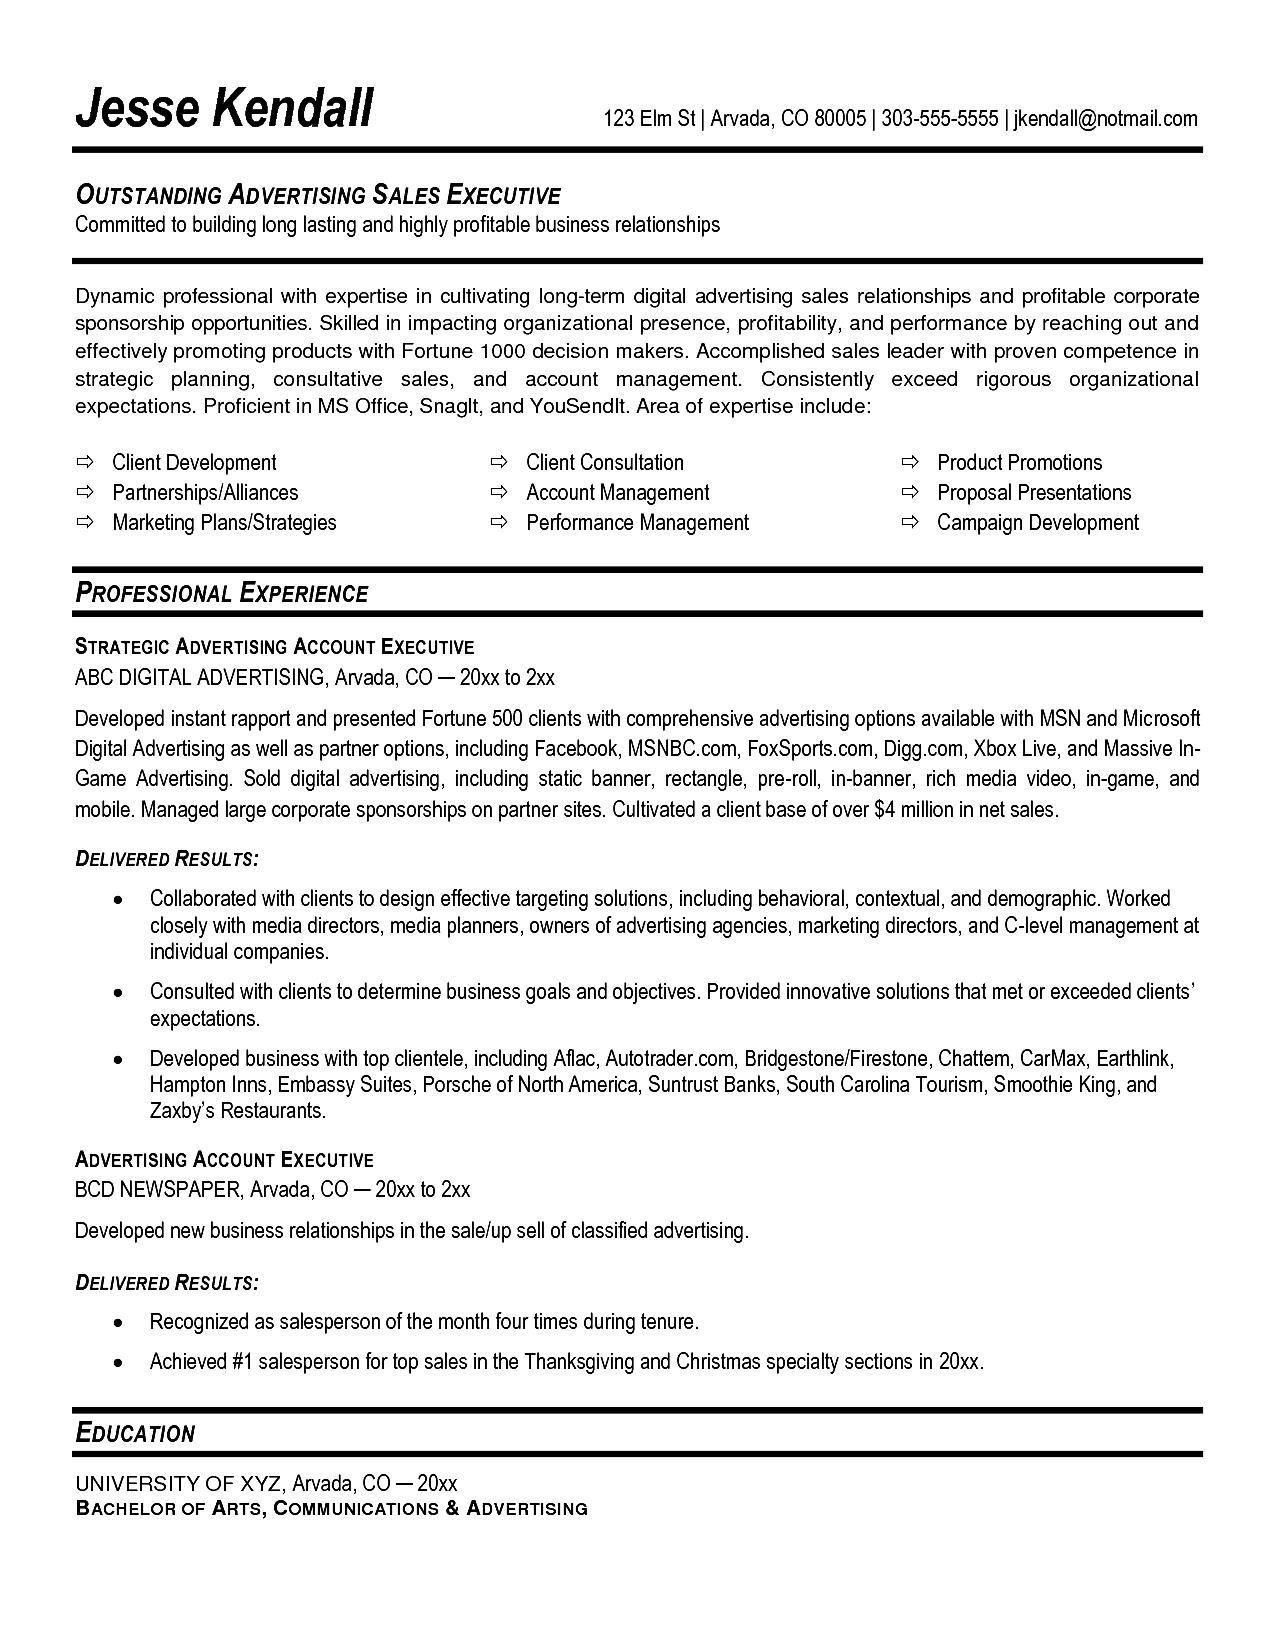 Sample Resume format for Accounts Executive Account Executive Resume Sample